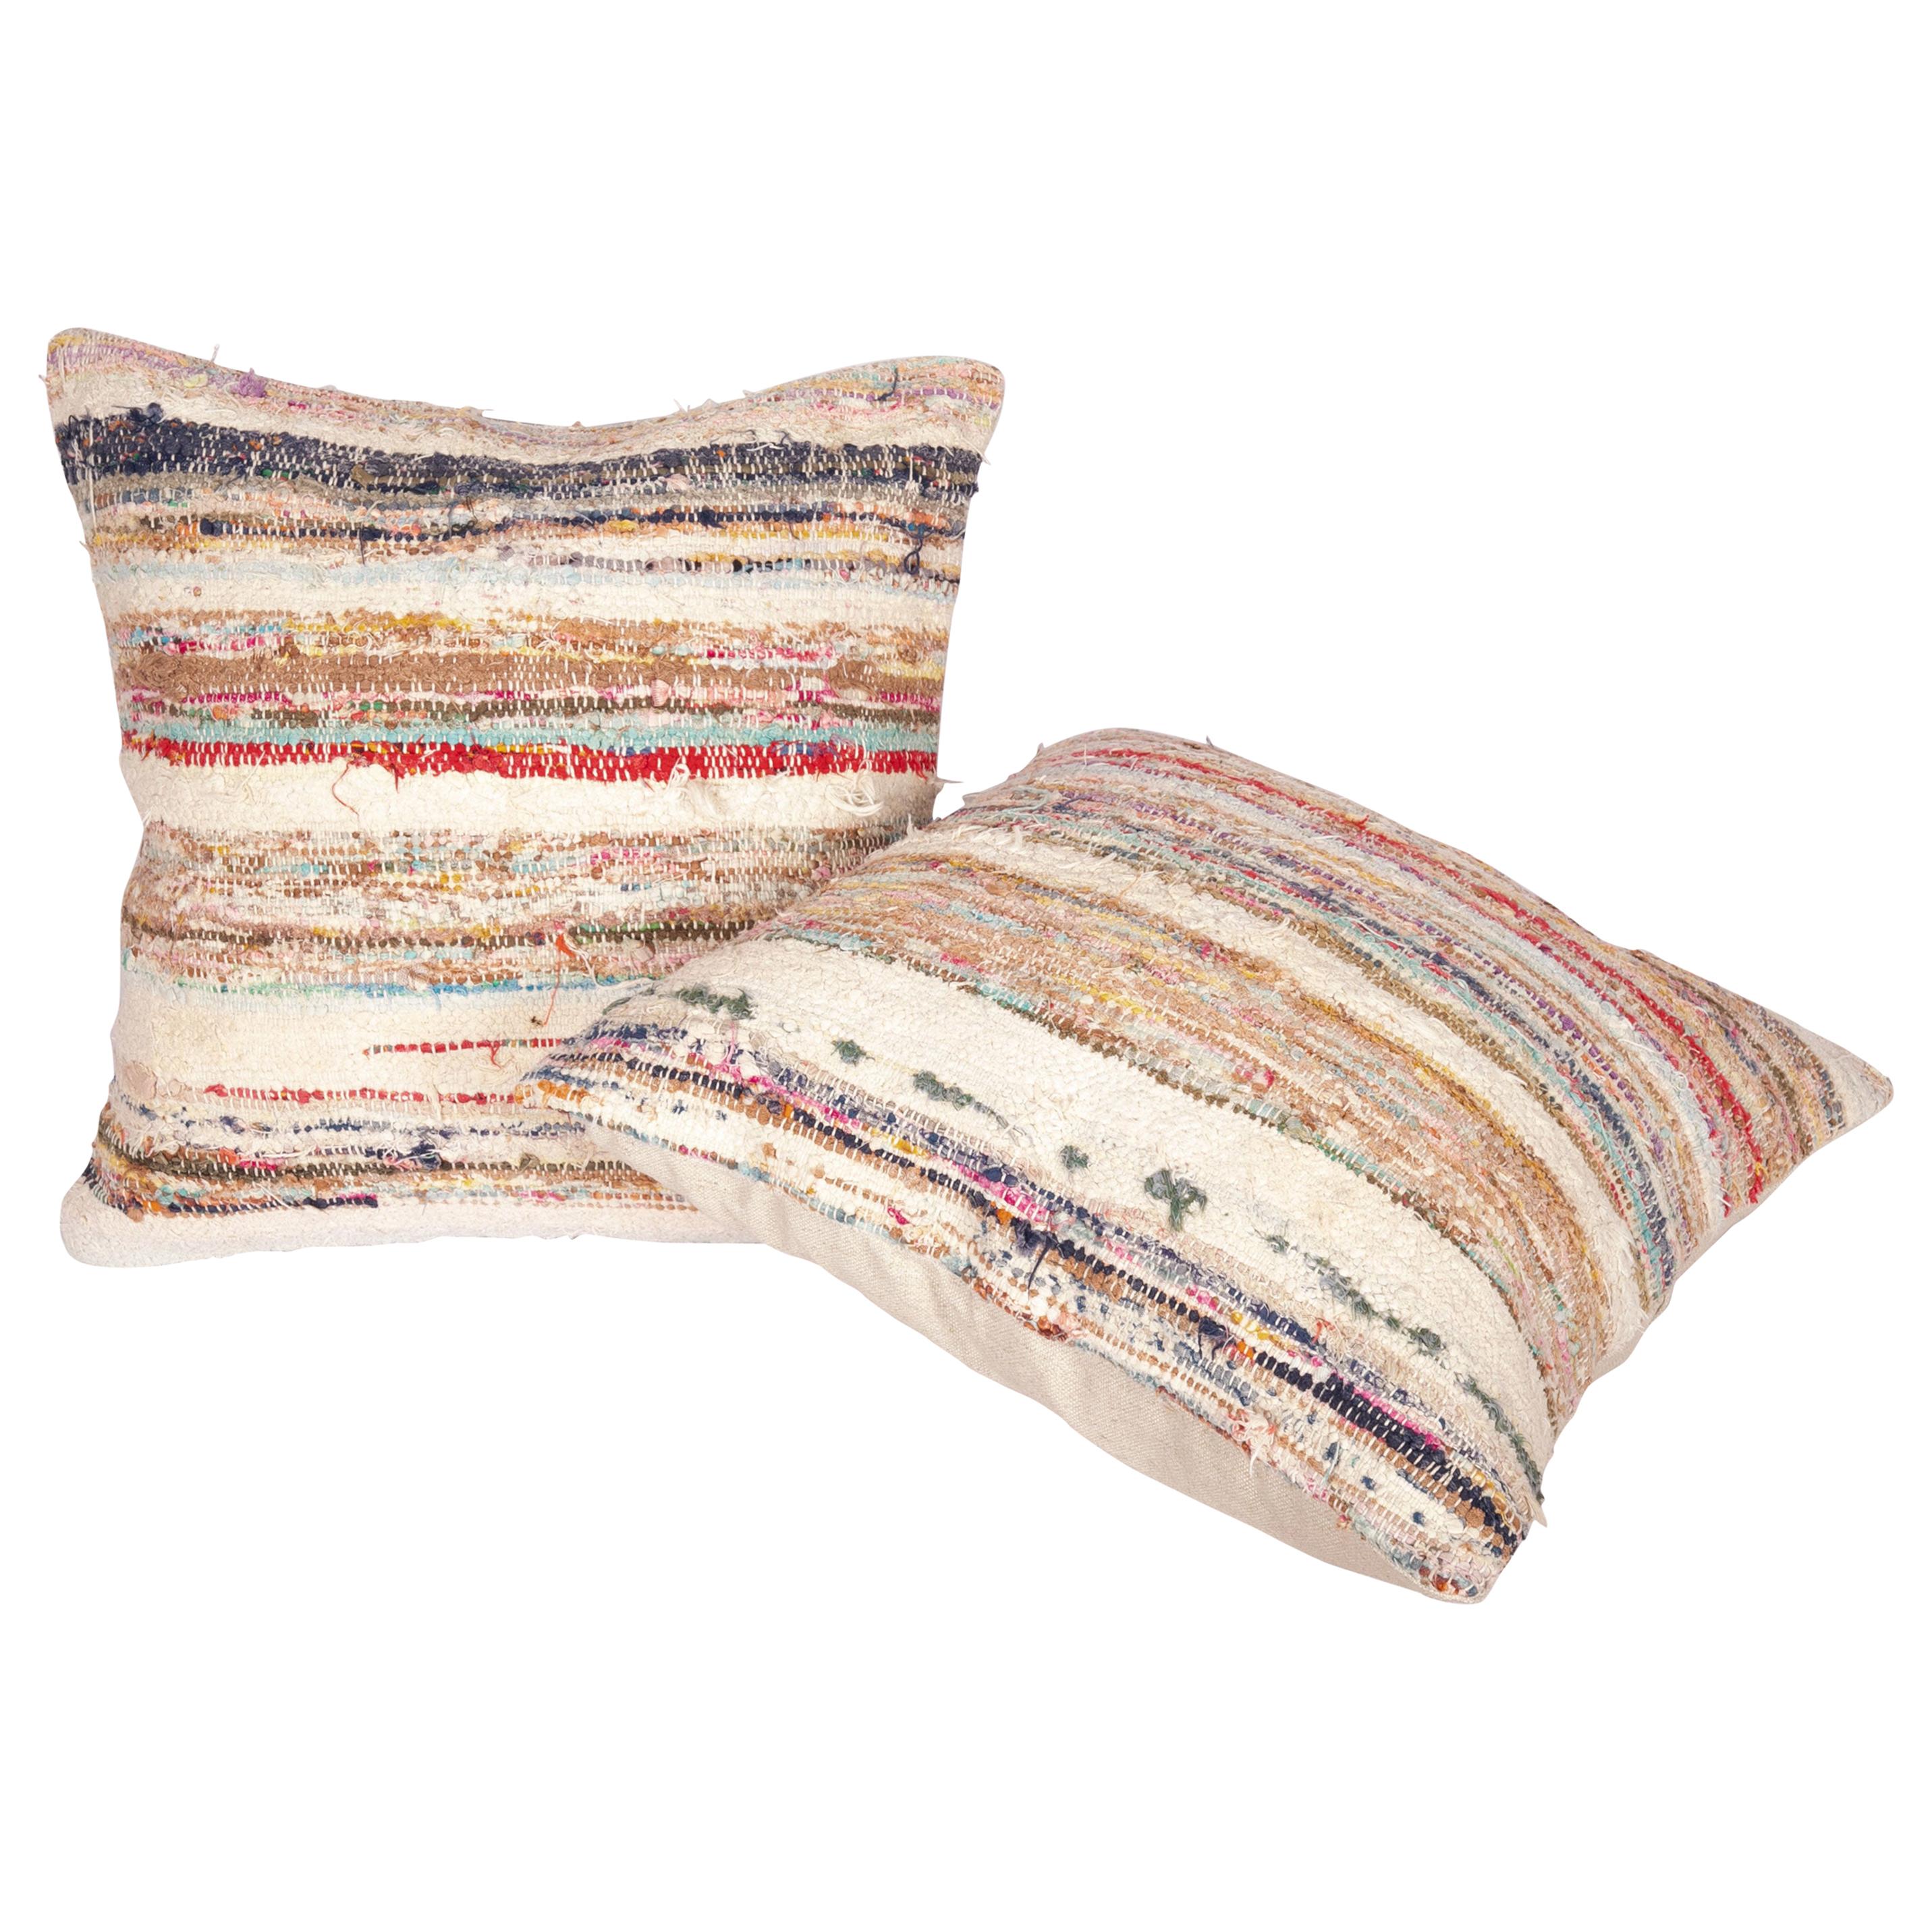 Rustic Pillow Cases Made from an Anatolian Rag Rug, Mid-20th Century For Sale